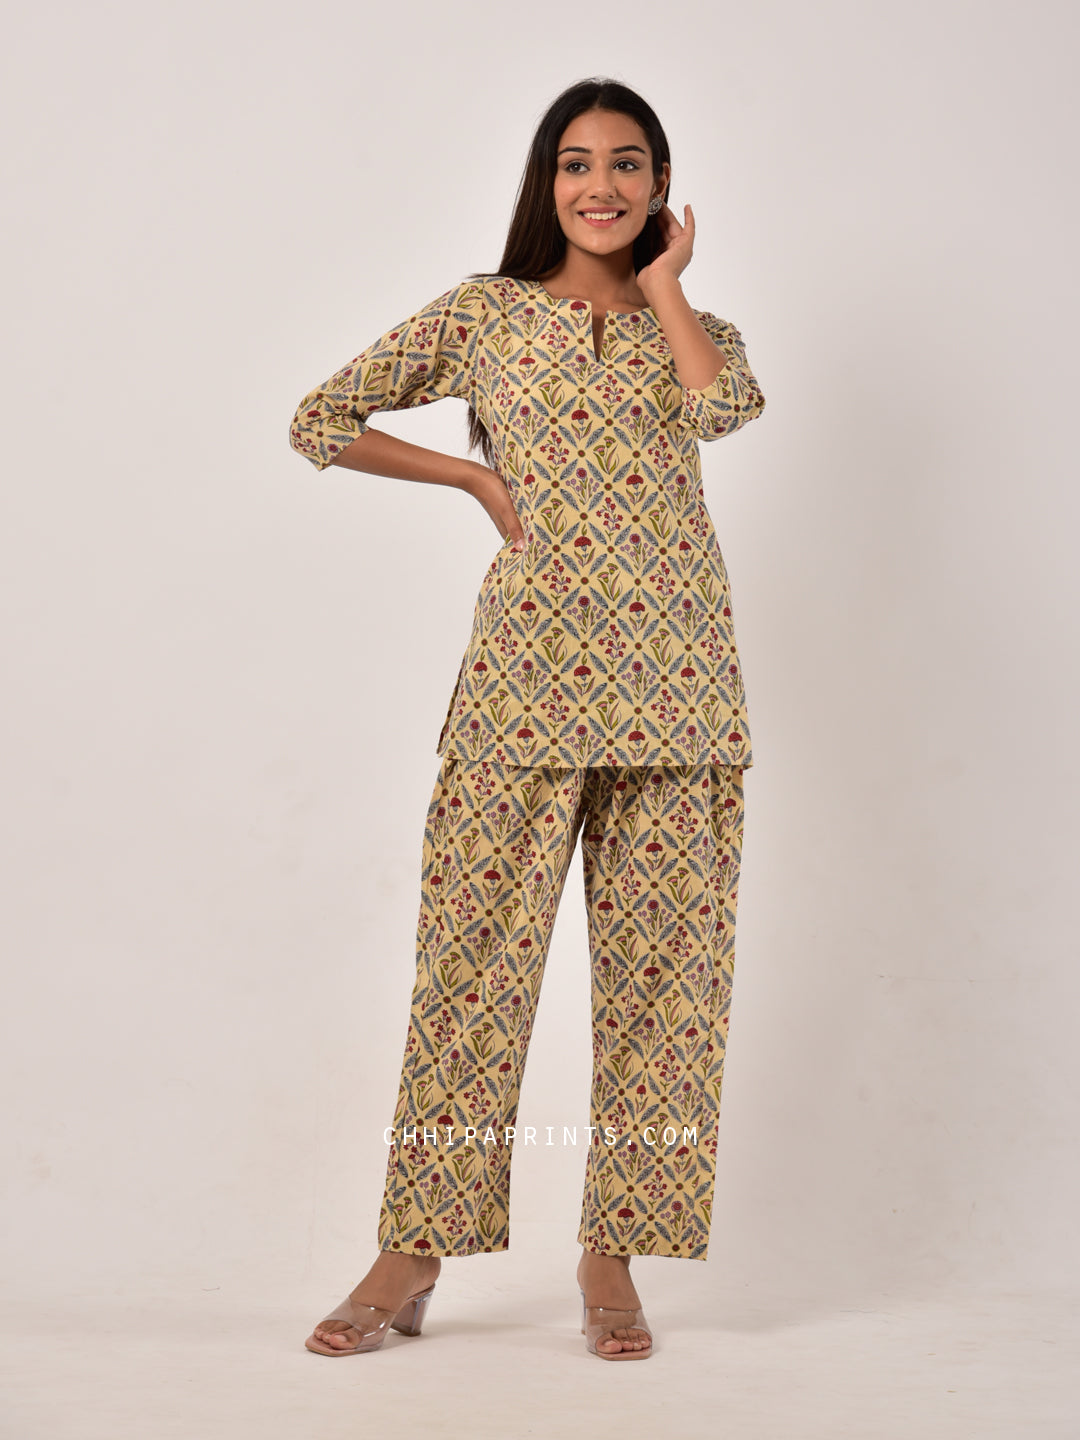 Cotton Night Suit Set in Beige Floral with Eye Mask